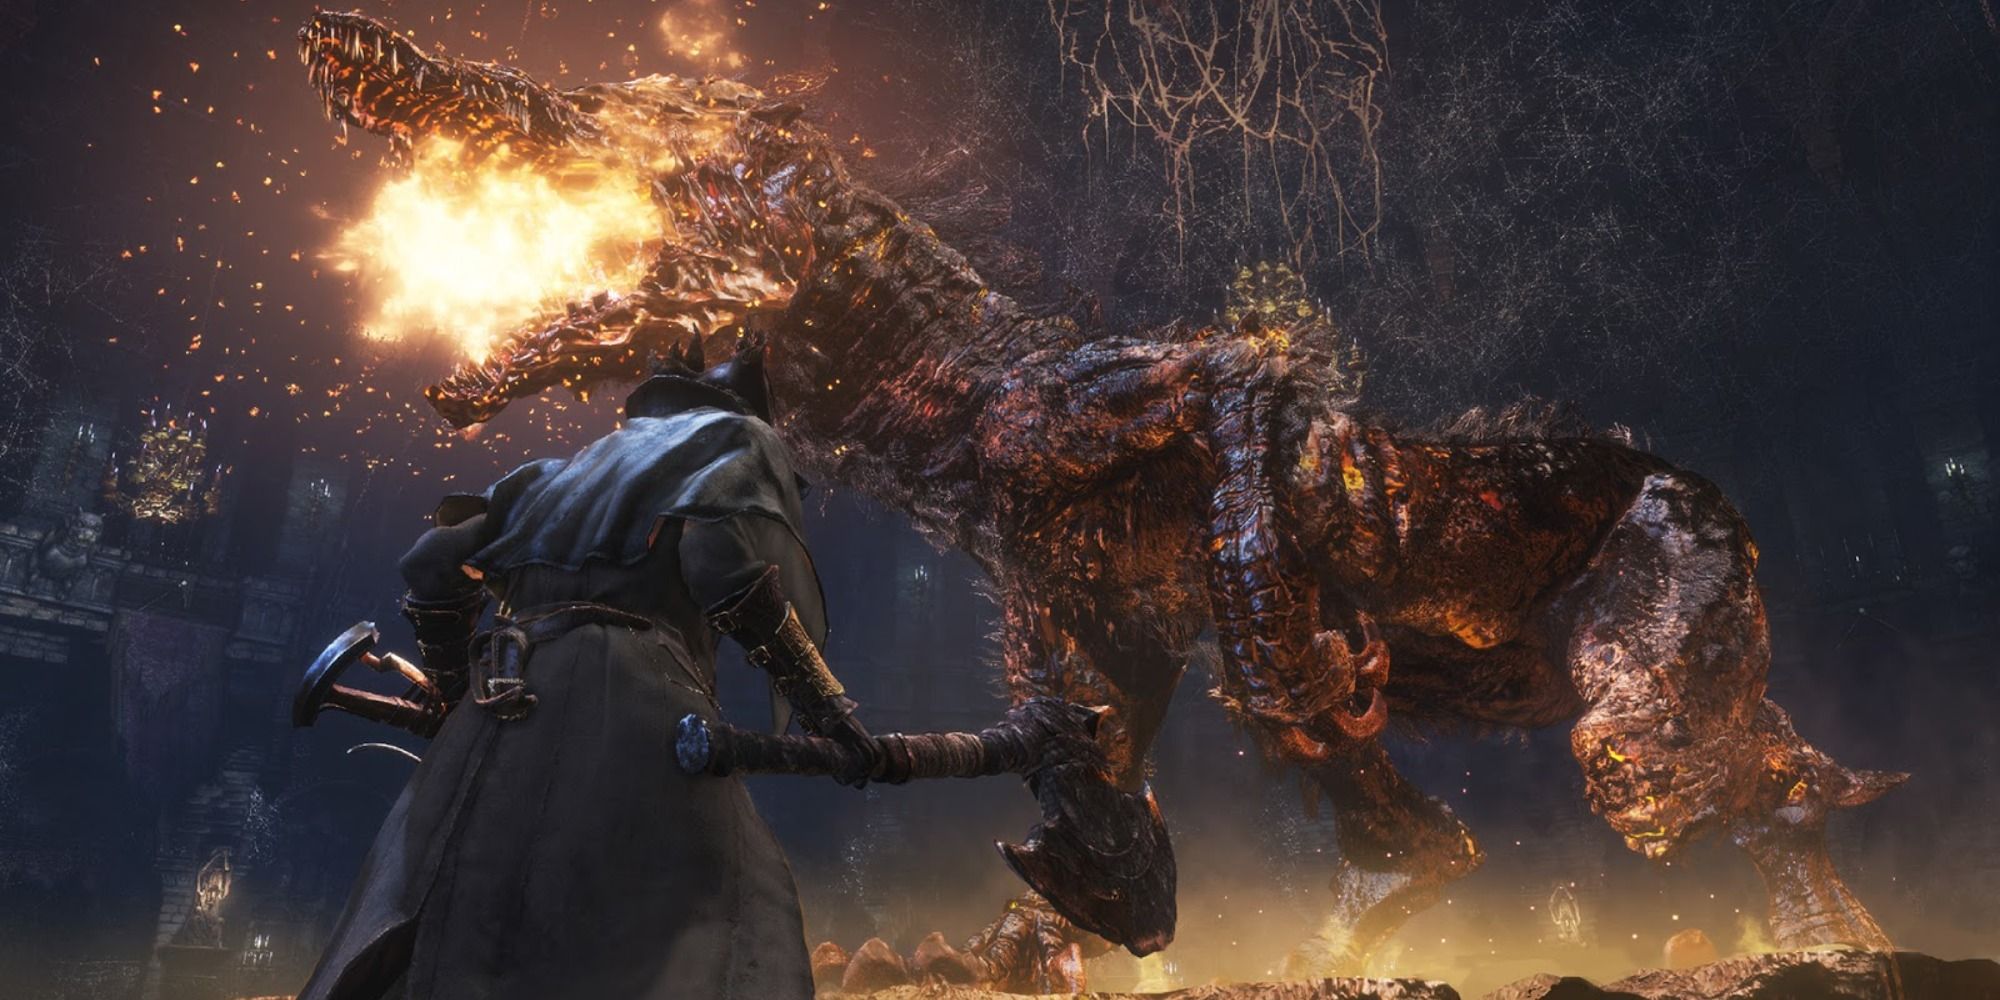 Watch Dog of the Old Lords boss fight in Bloodborne - A giant, flaming dog.